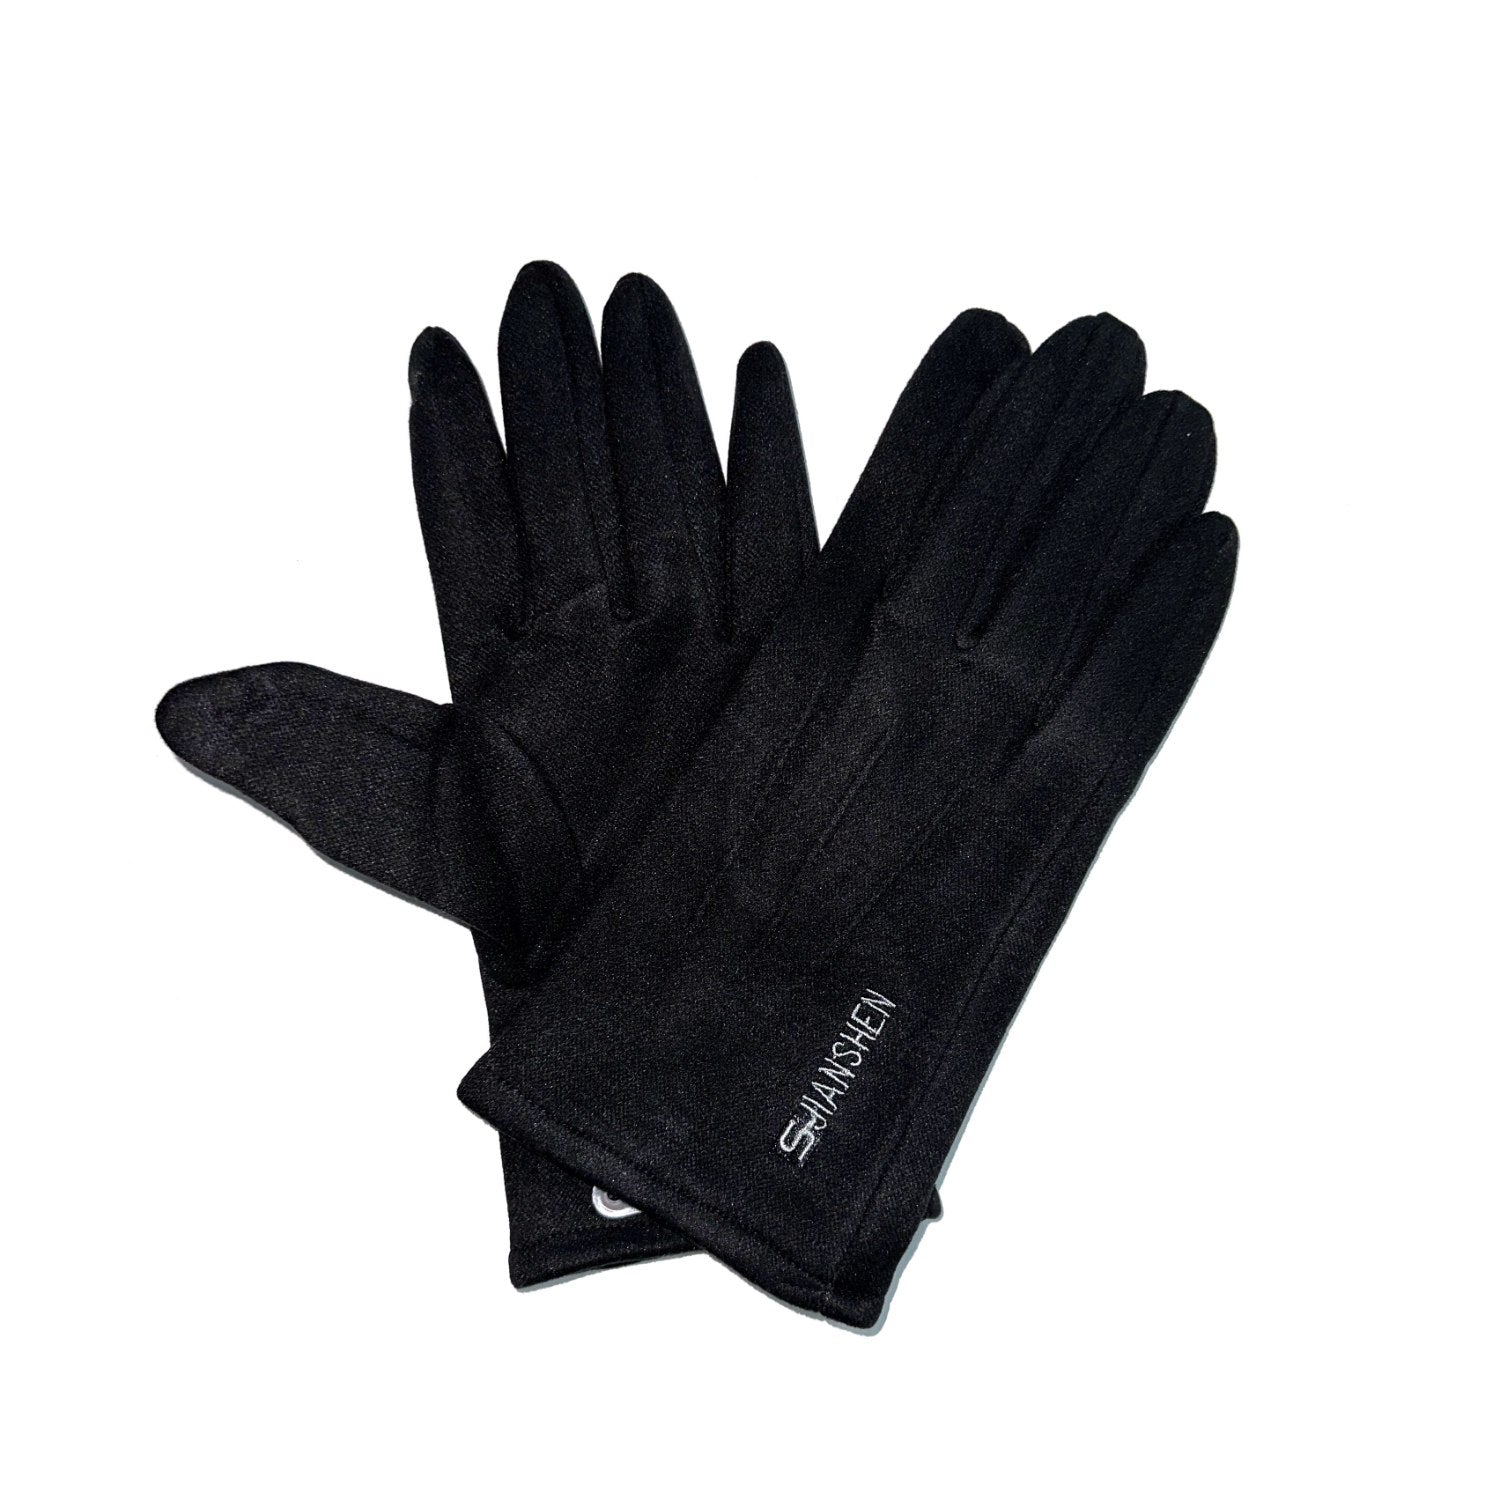 Buy Gokyo K2 Insulation Layering Gloves Black | Cold Weather Gloves at Gokyo Outdoor Clothing & Gear